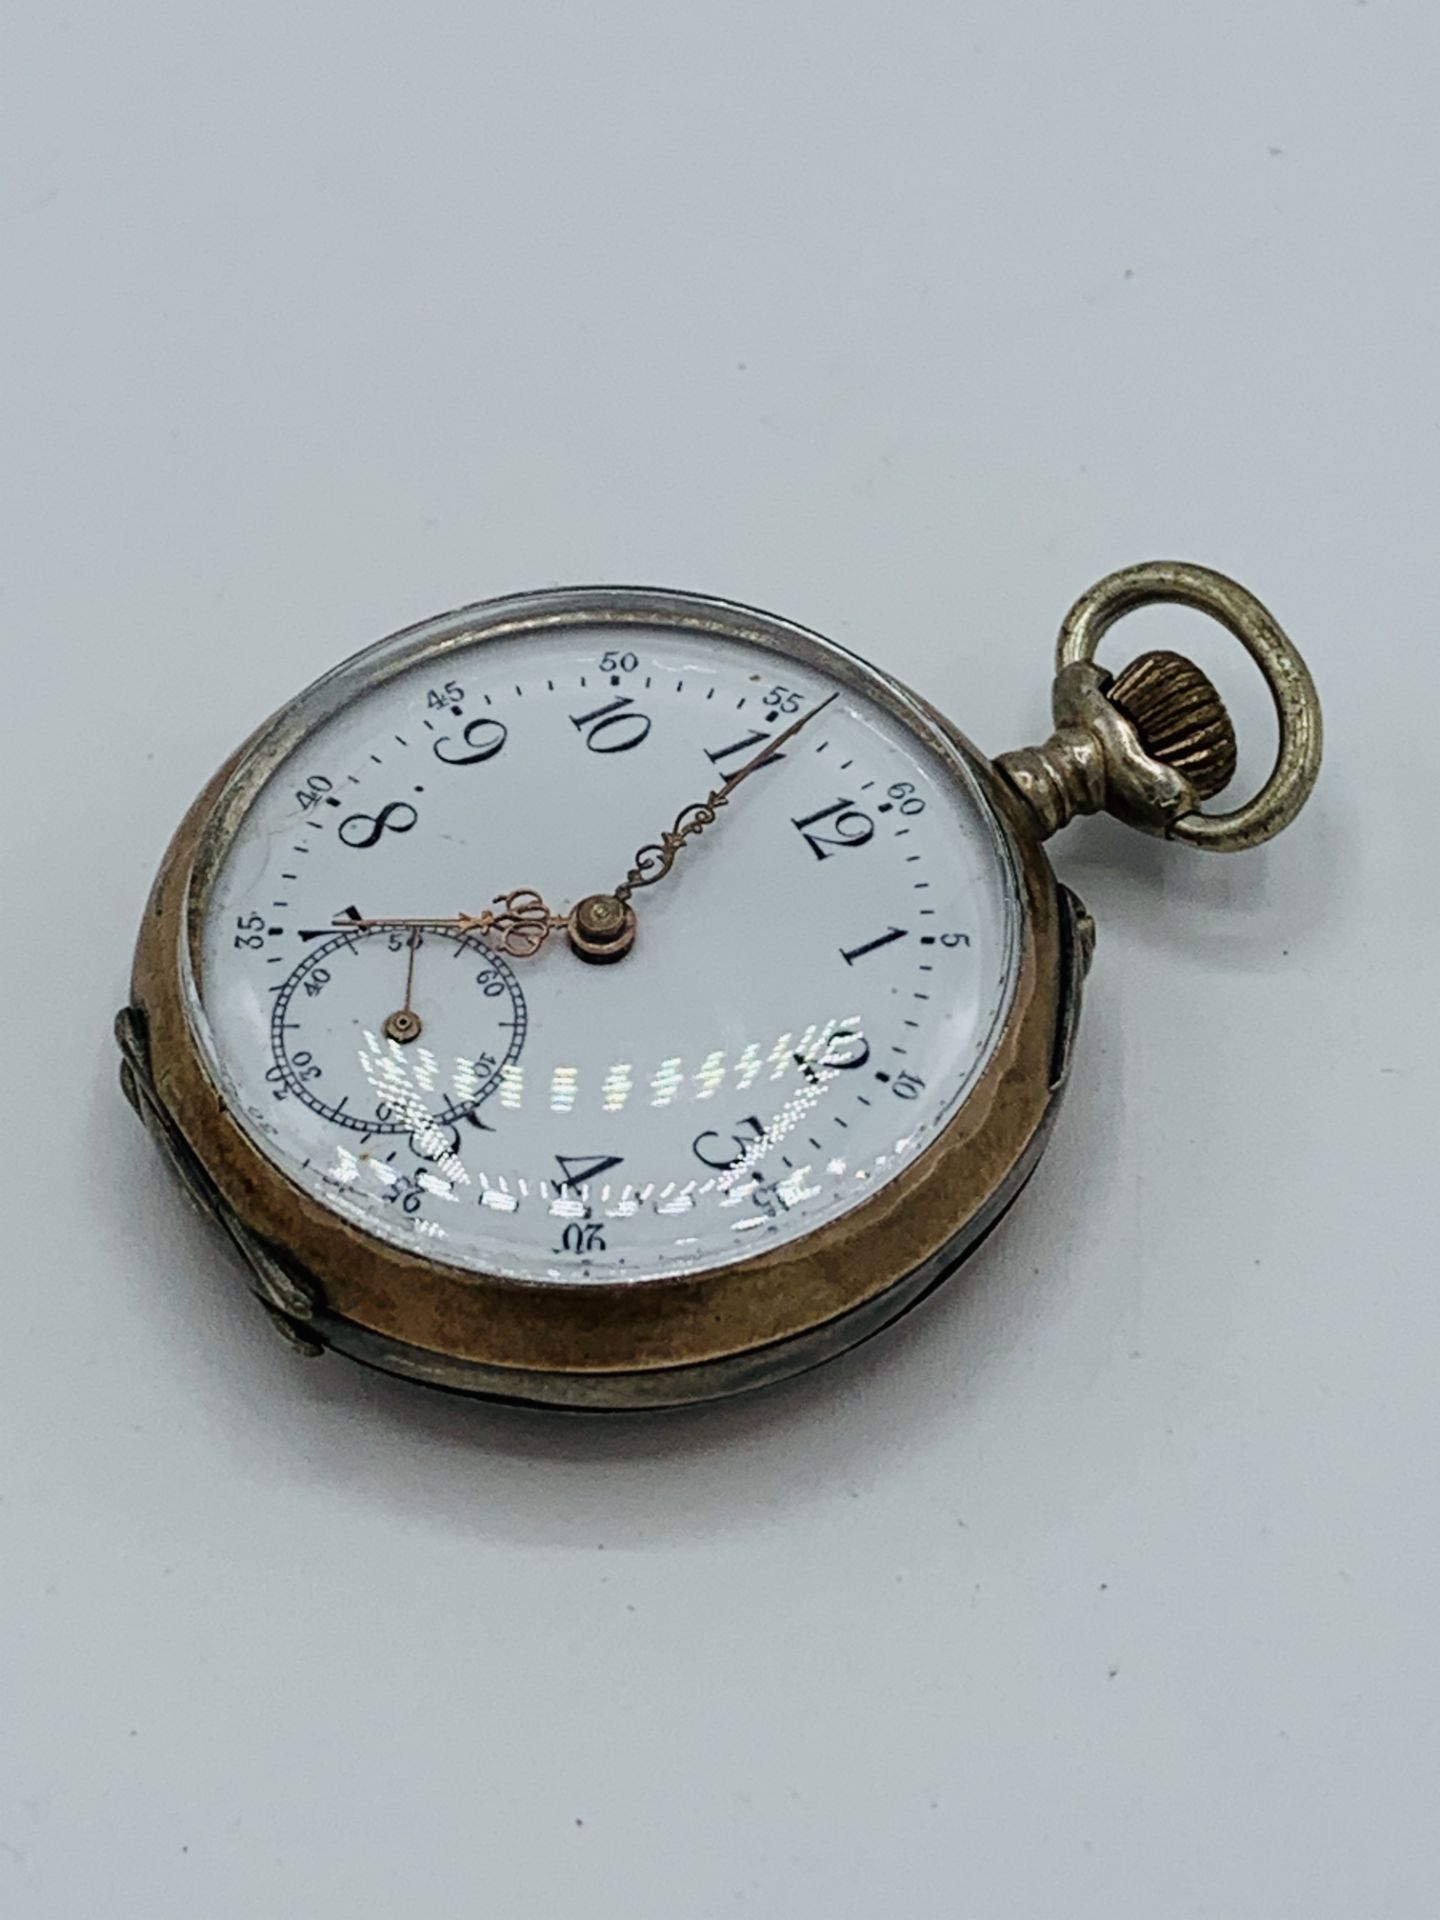 800 silver and gold plate case manual wind lady's pocket watch, in going order - Image 4 of 6